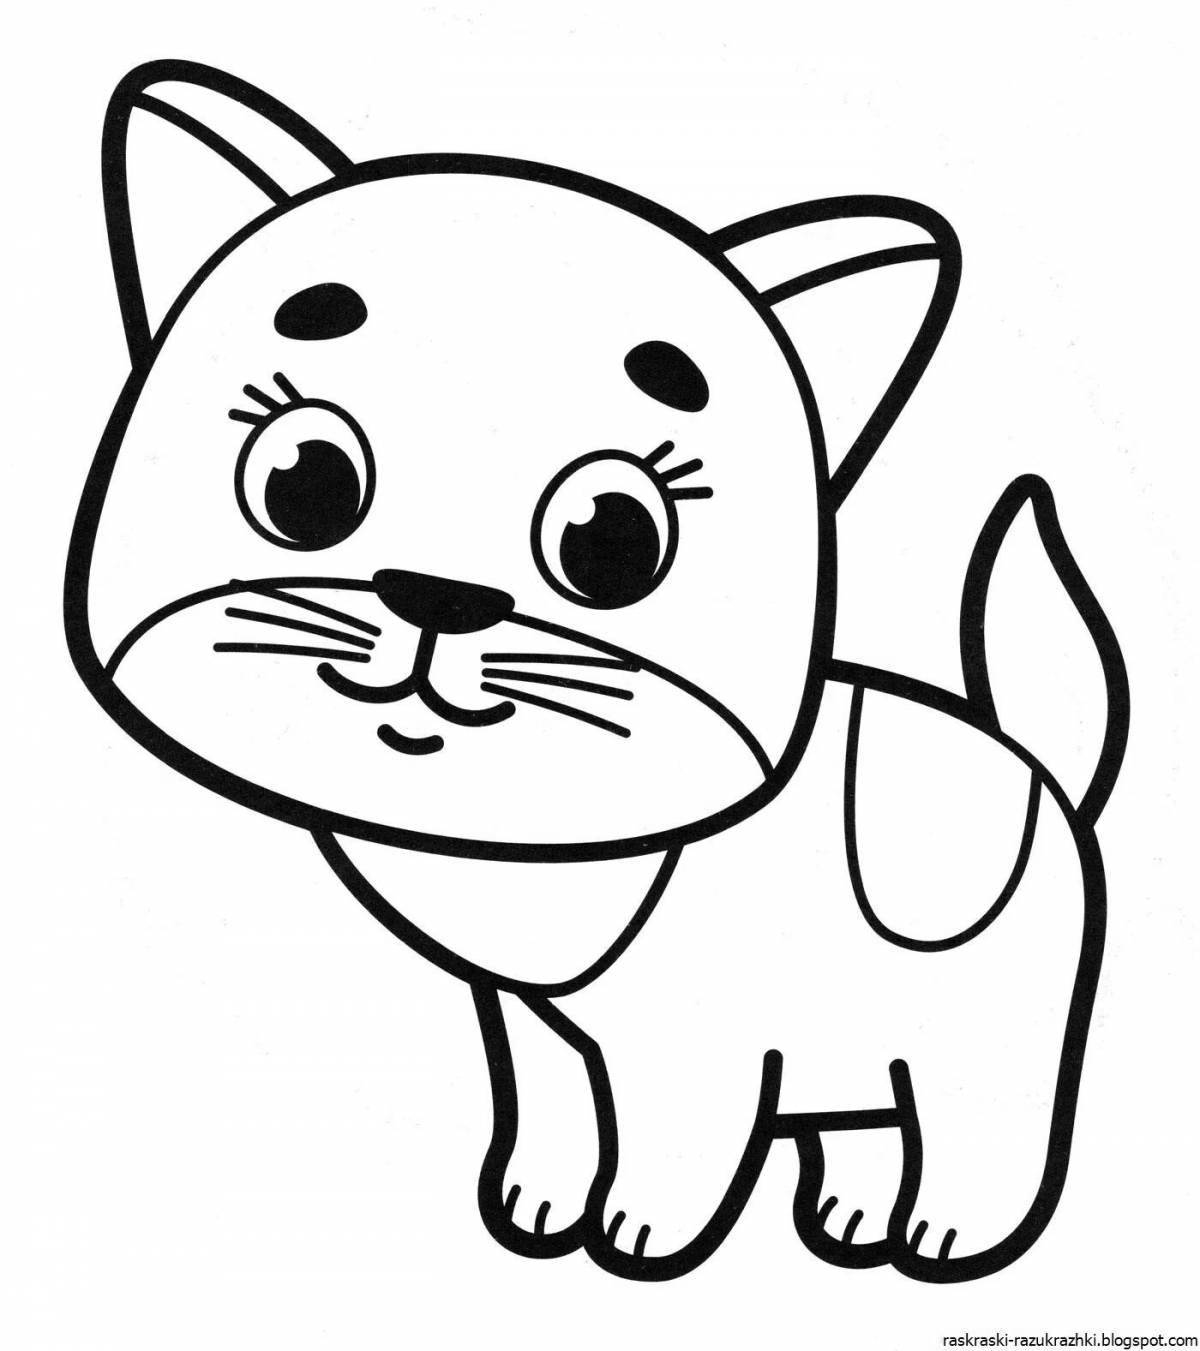 Witty kitty coloring book for 2-3 year olds